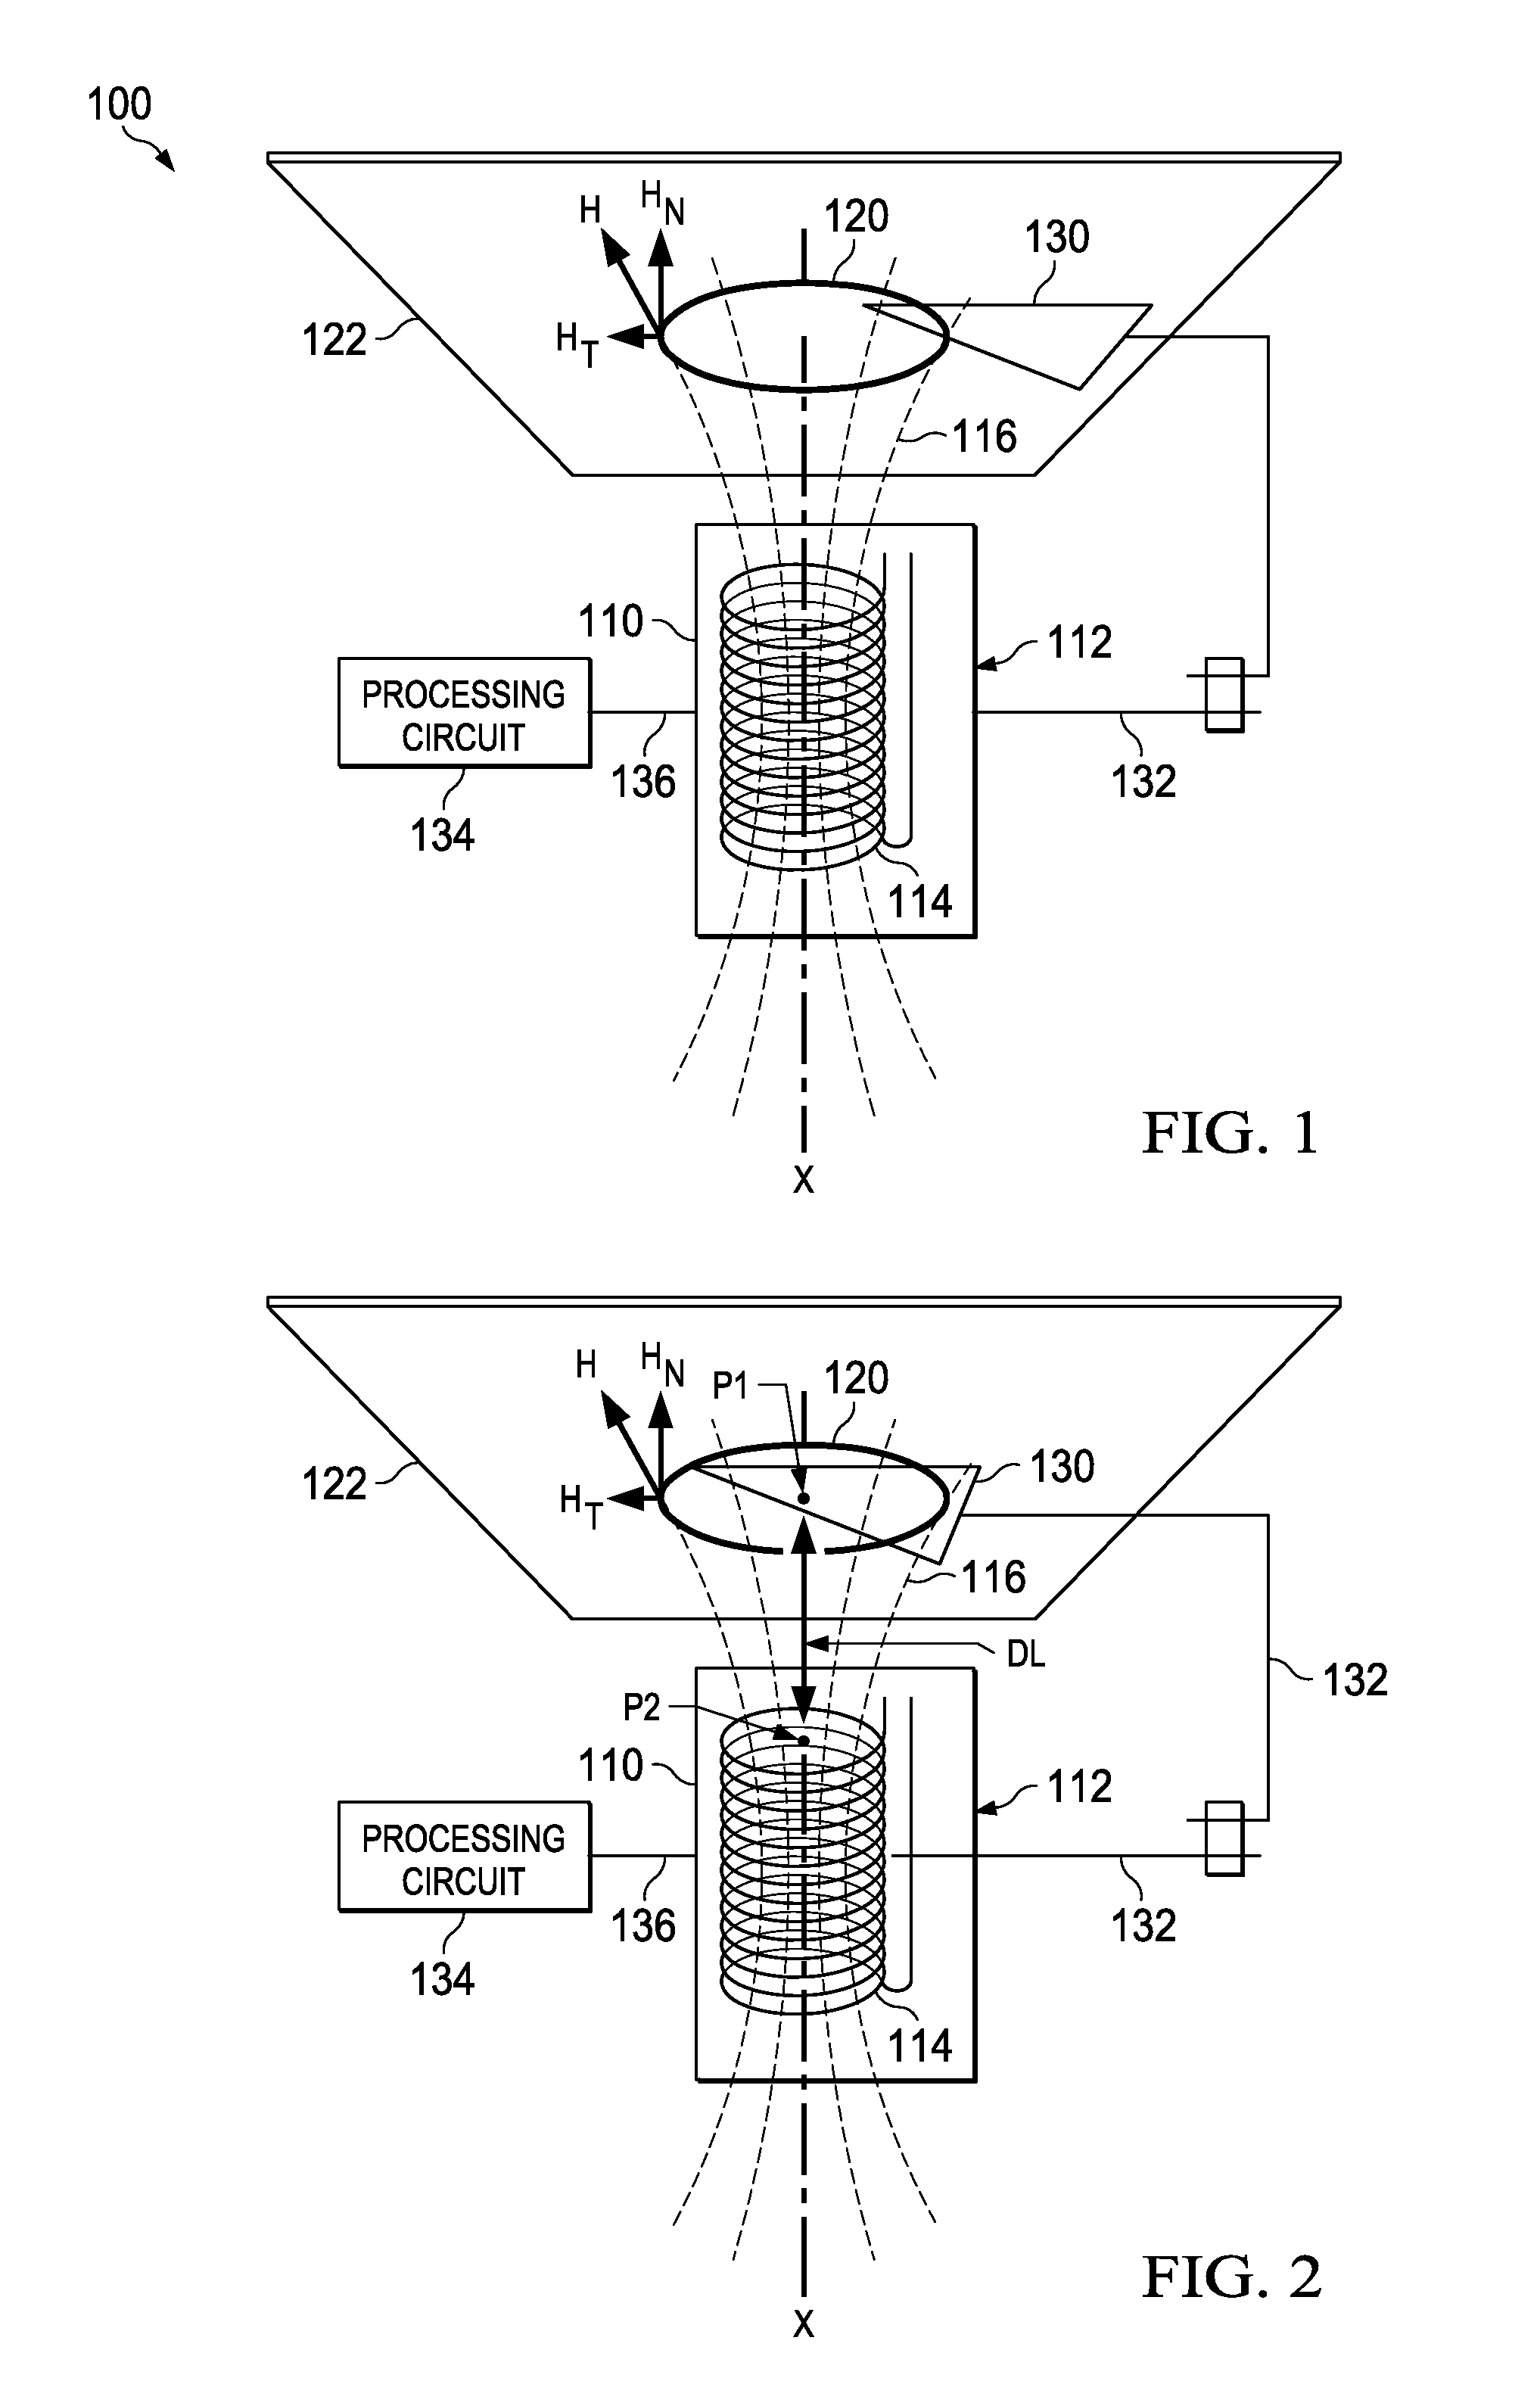 Inductive sensing including inductance multiplication with series connected coils